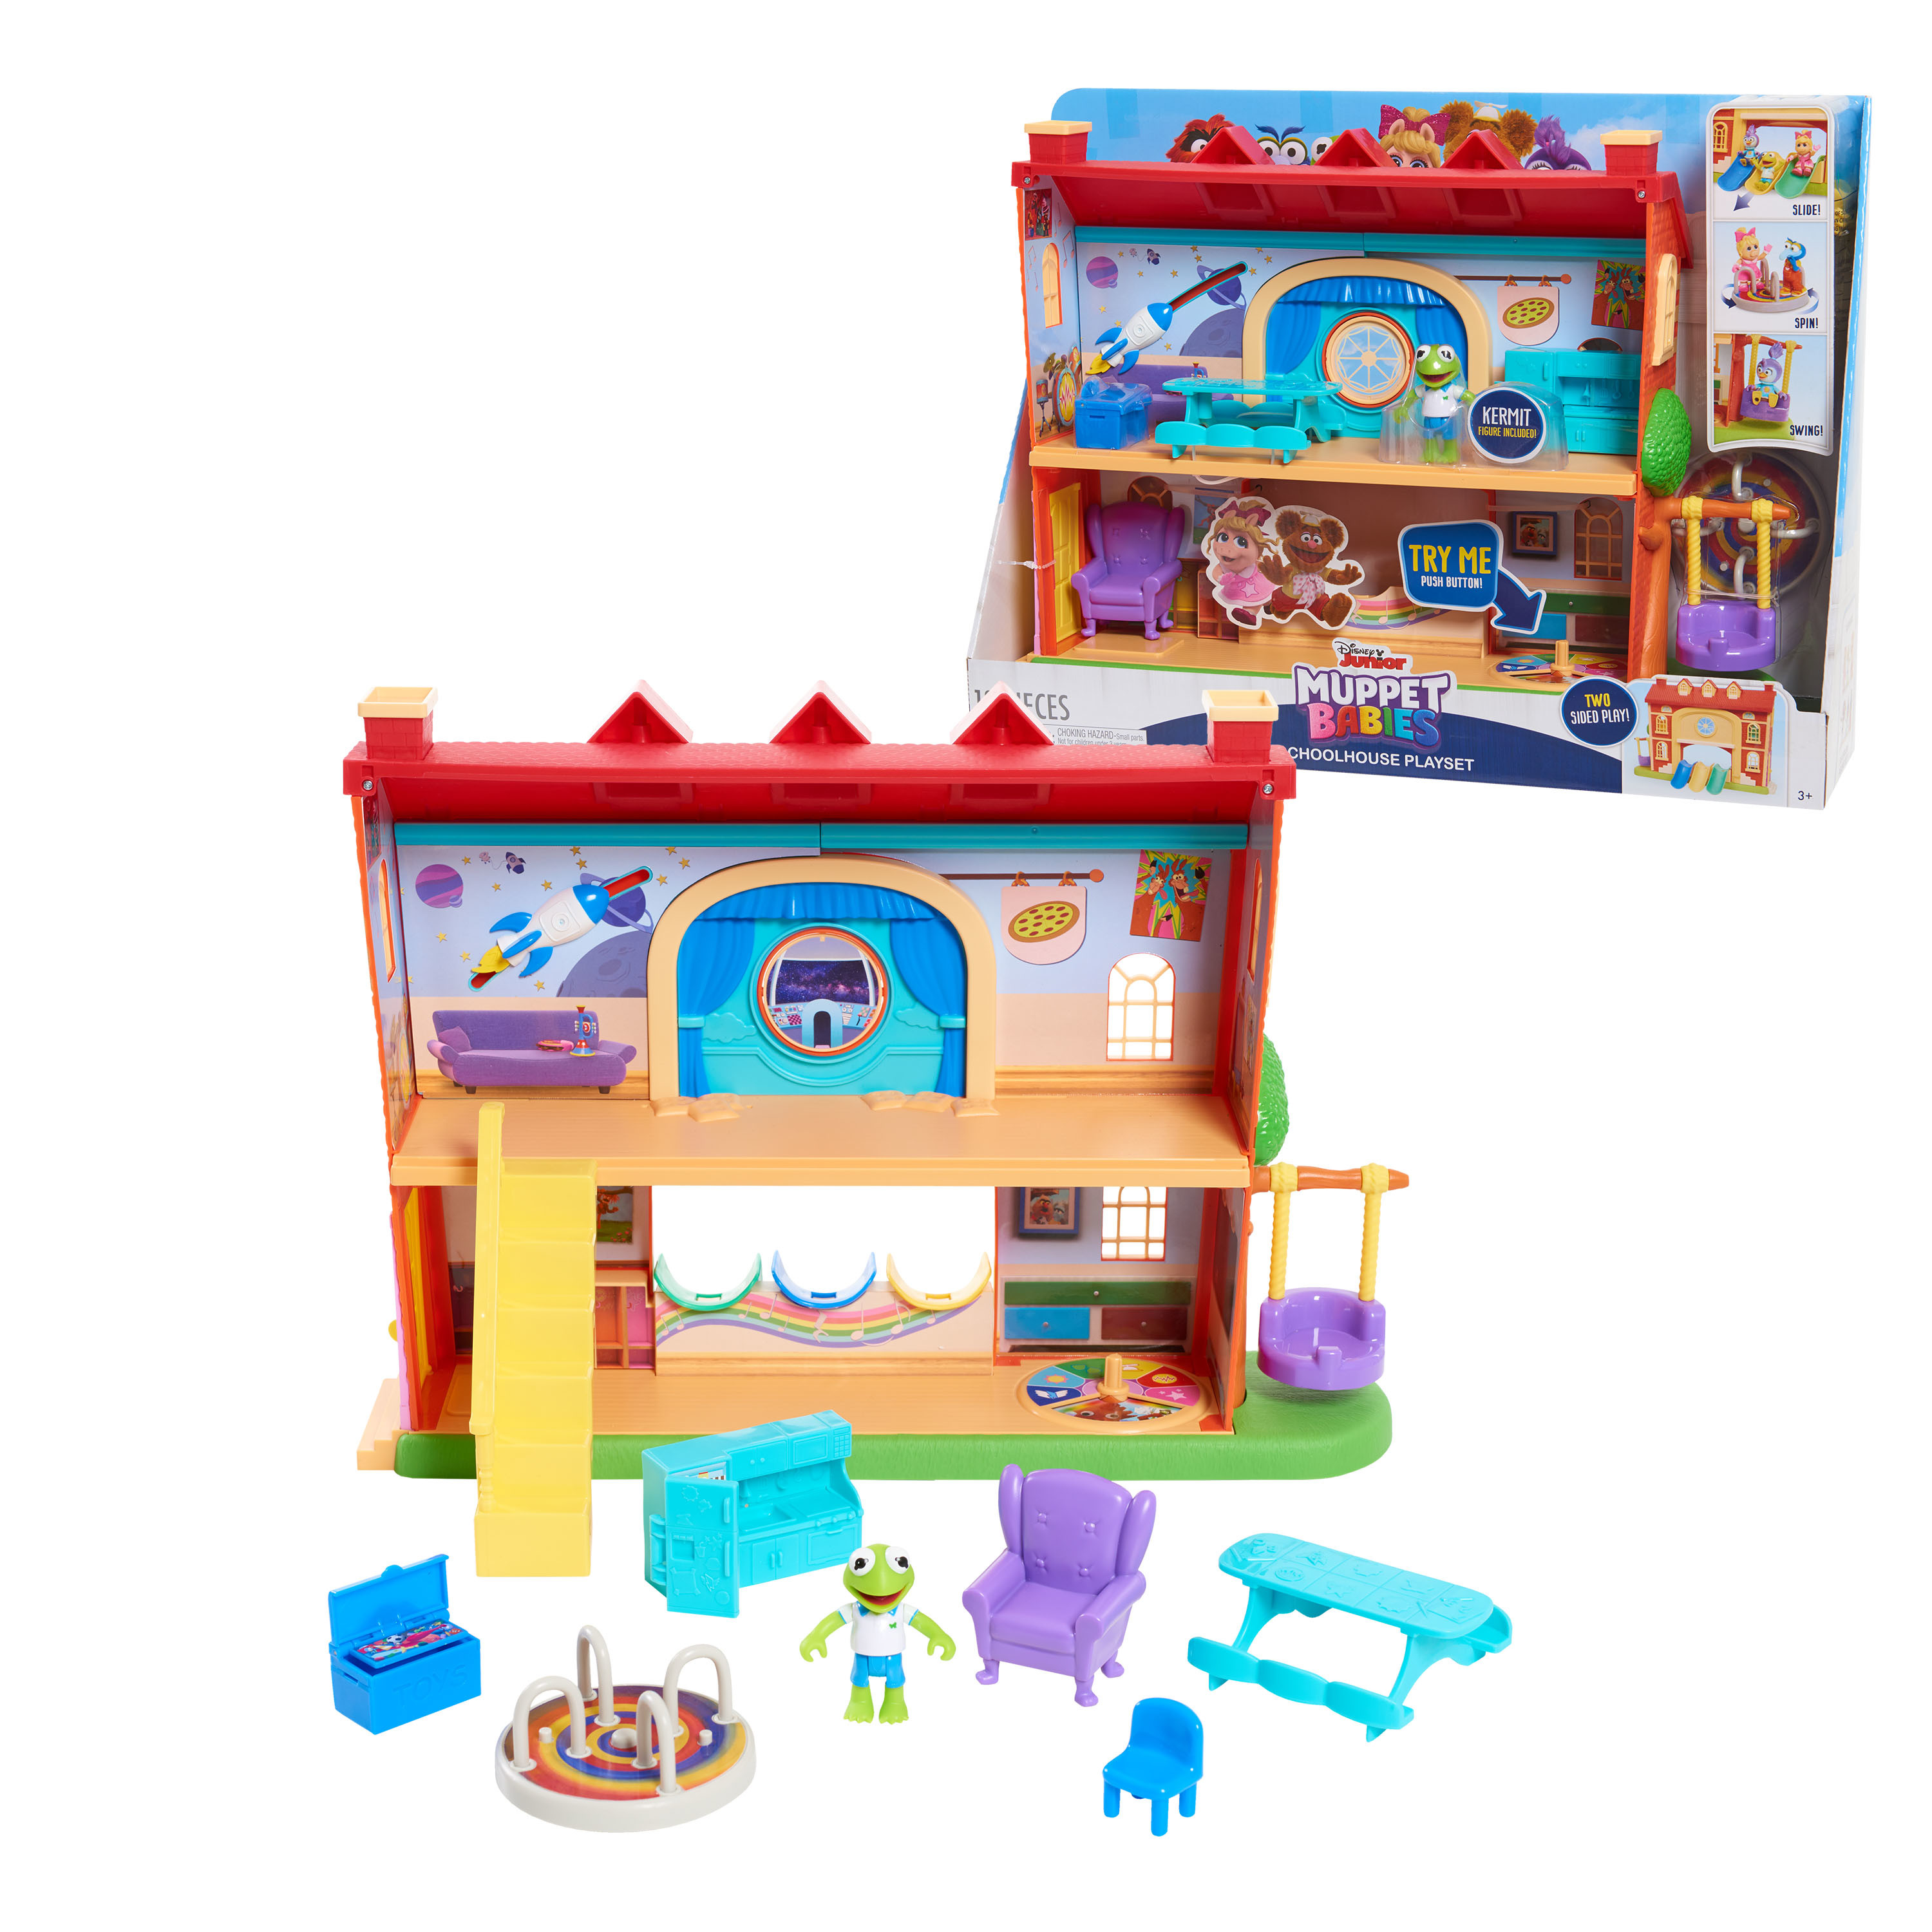 Disney Junior Muppets Babies School House Playset, Includes Articulated Kermit the Frog Figure and Accessories, Officially Licensed Kids Toys for Ages 3 Up, Gifts and Presents - image 1 of 3